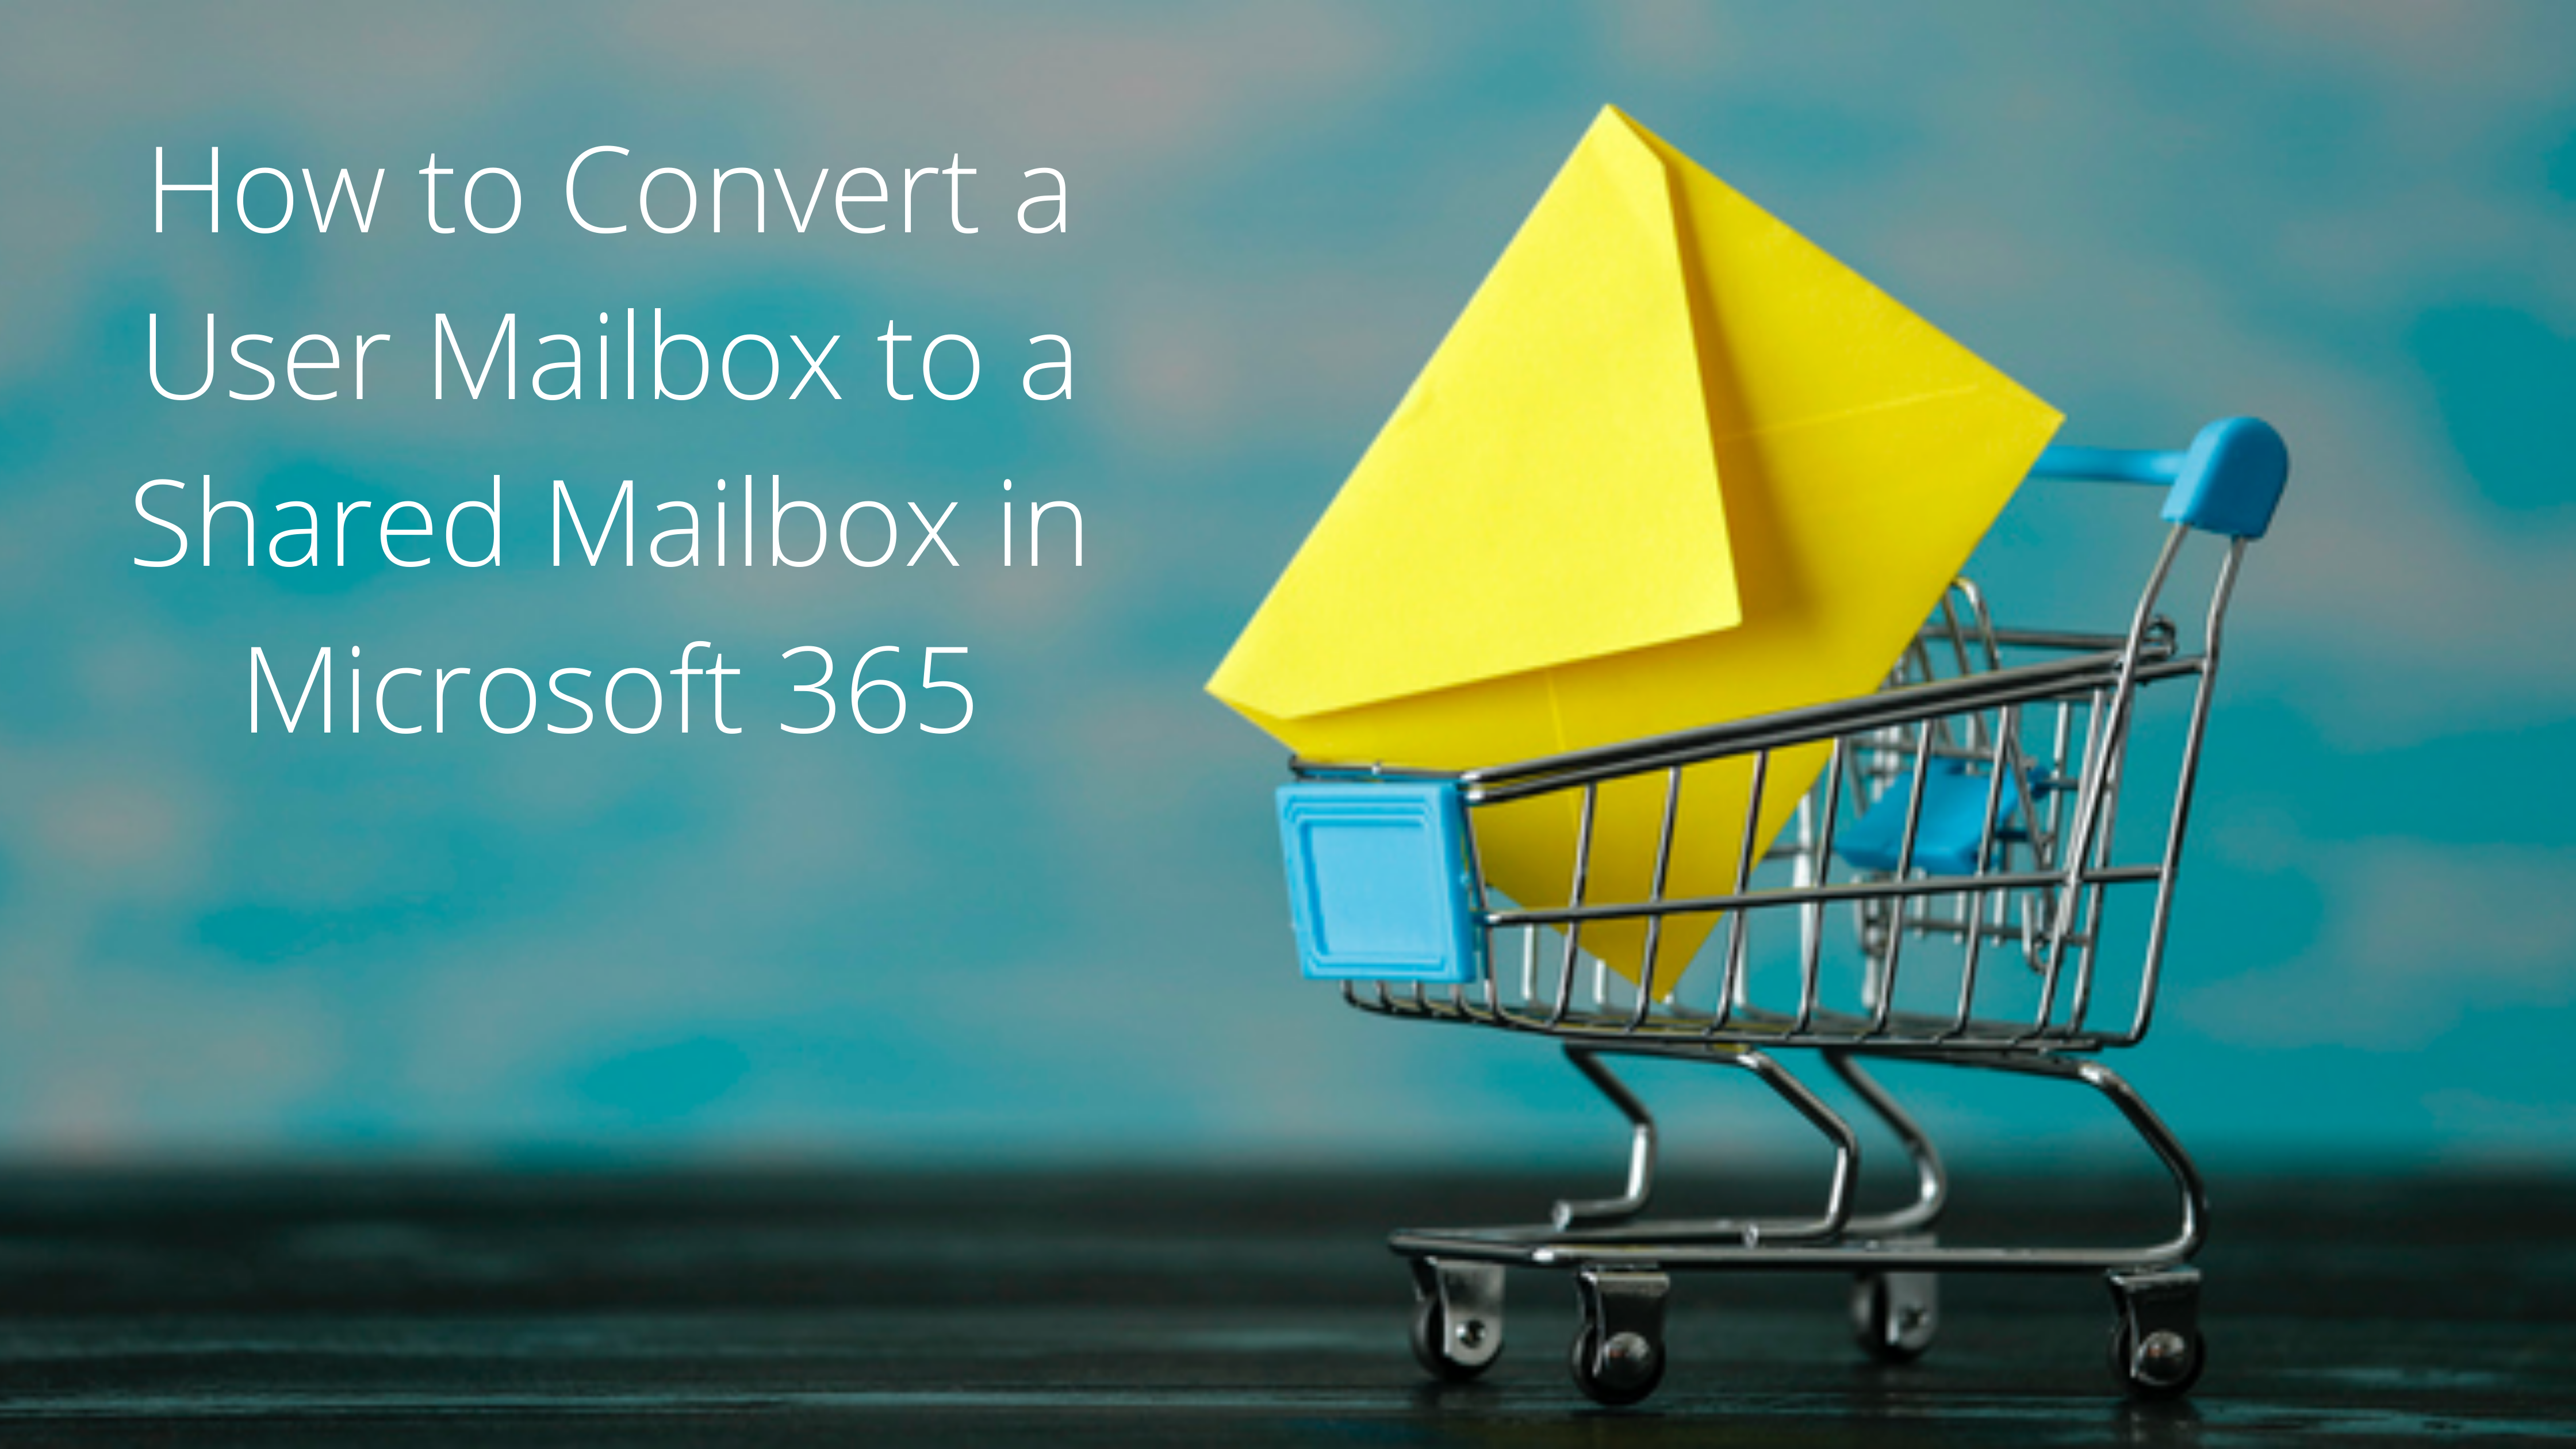 How to Convert a User Mailbox to a Shared Mailbox in Microsoft